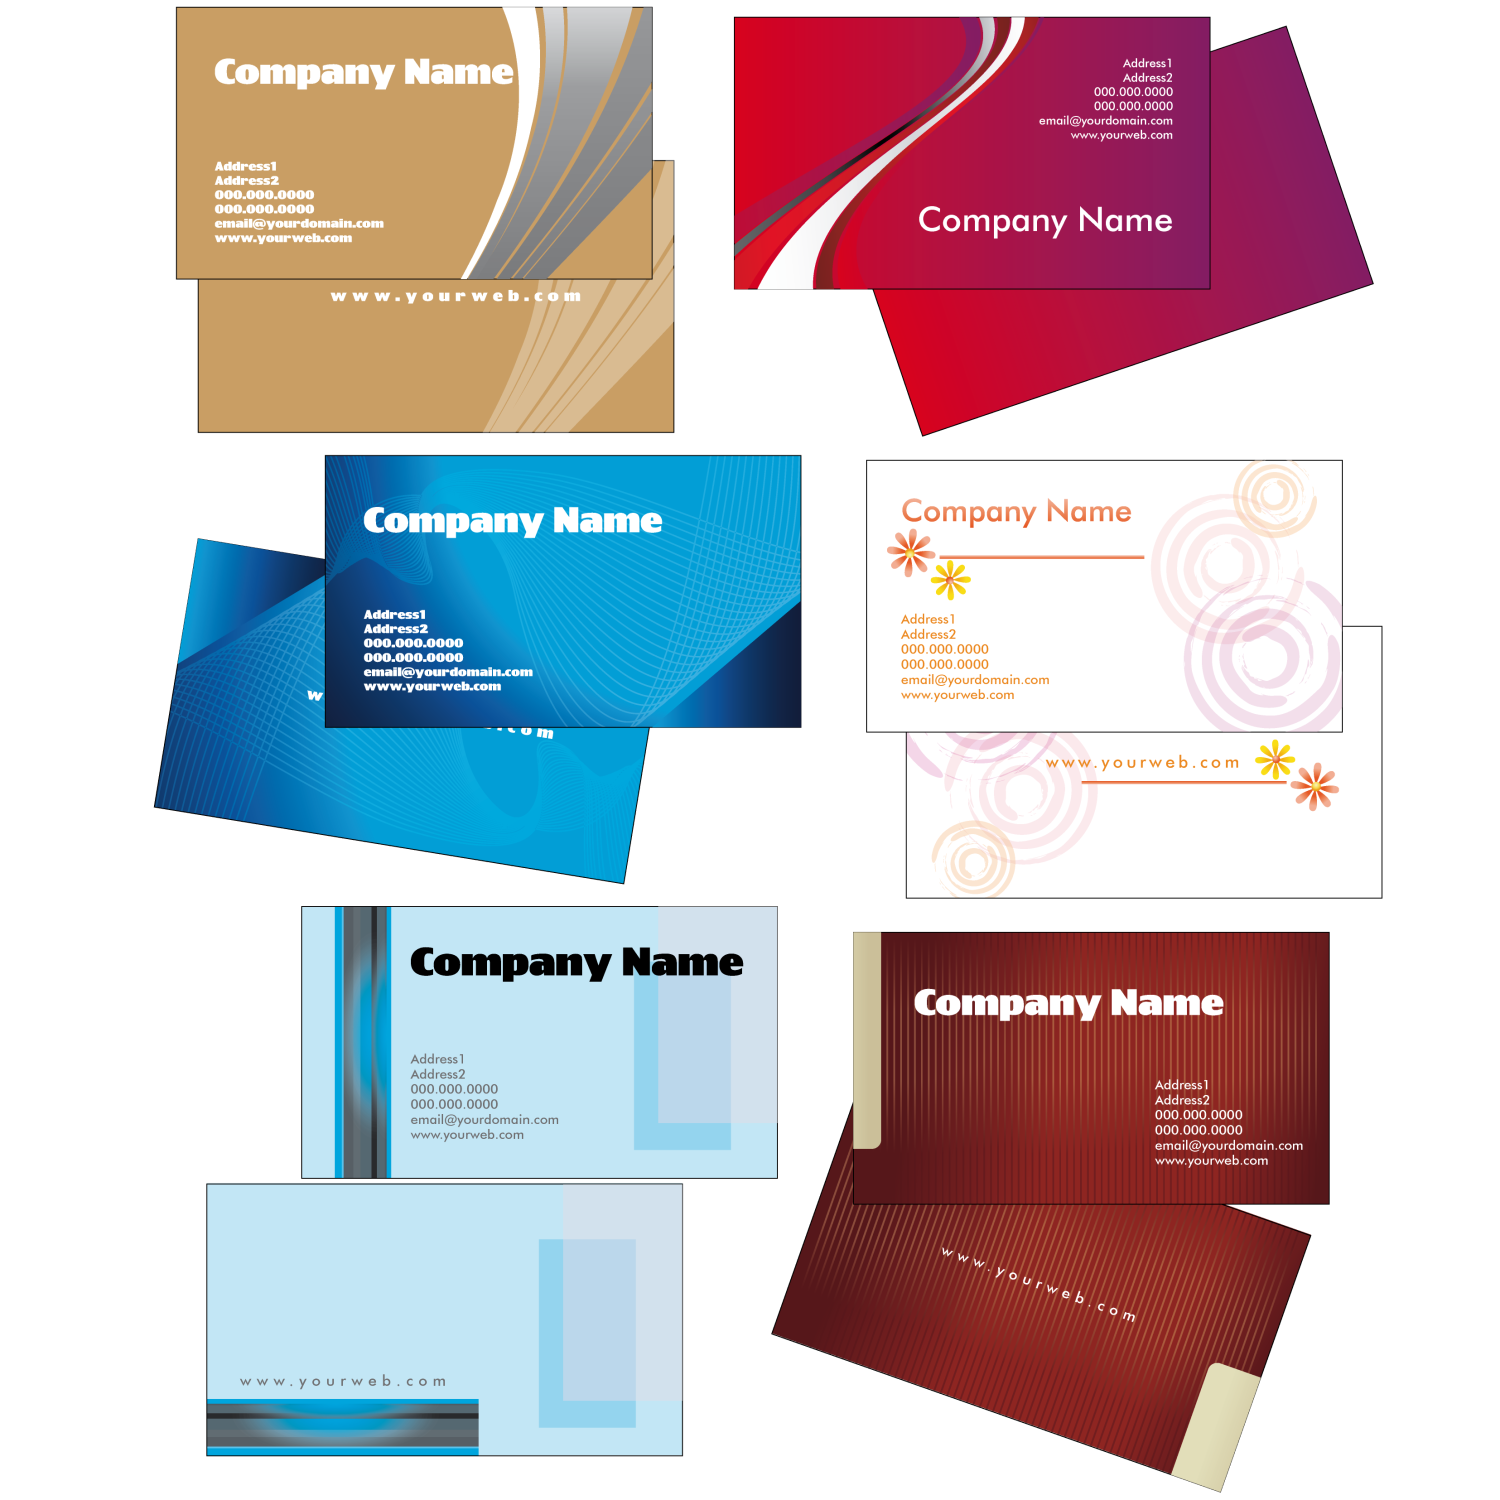 Png For Business Use - Creative Business Card Templates U2013 2, Transparent background PNG HD thumbnail